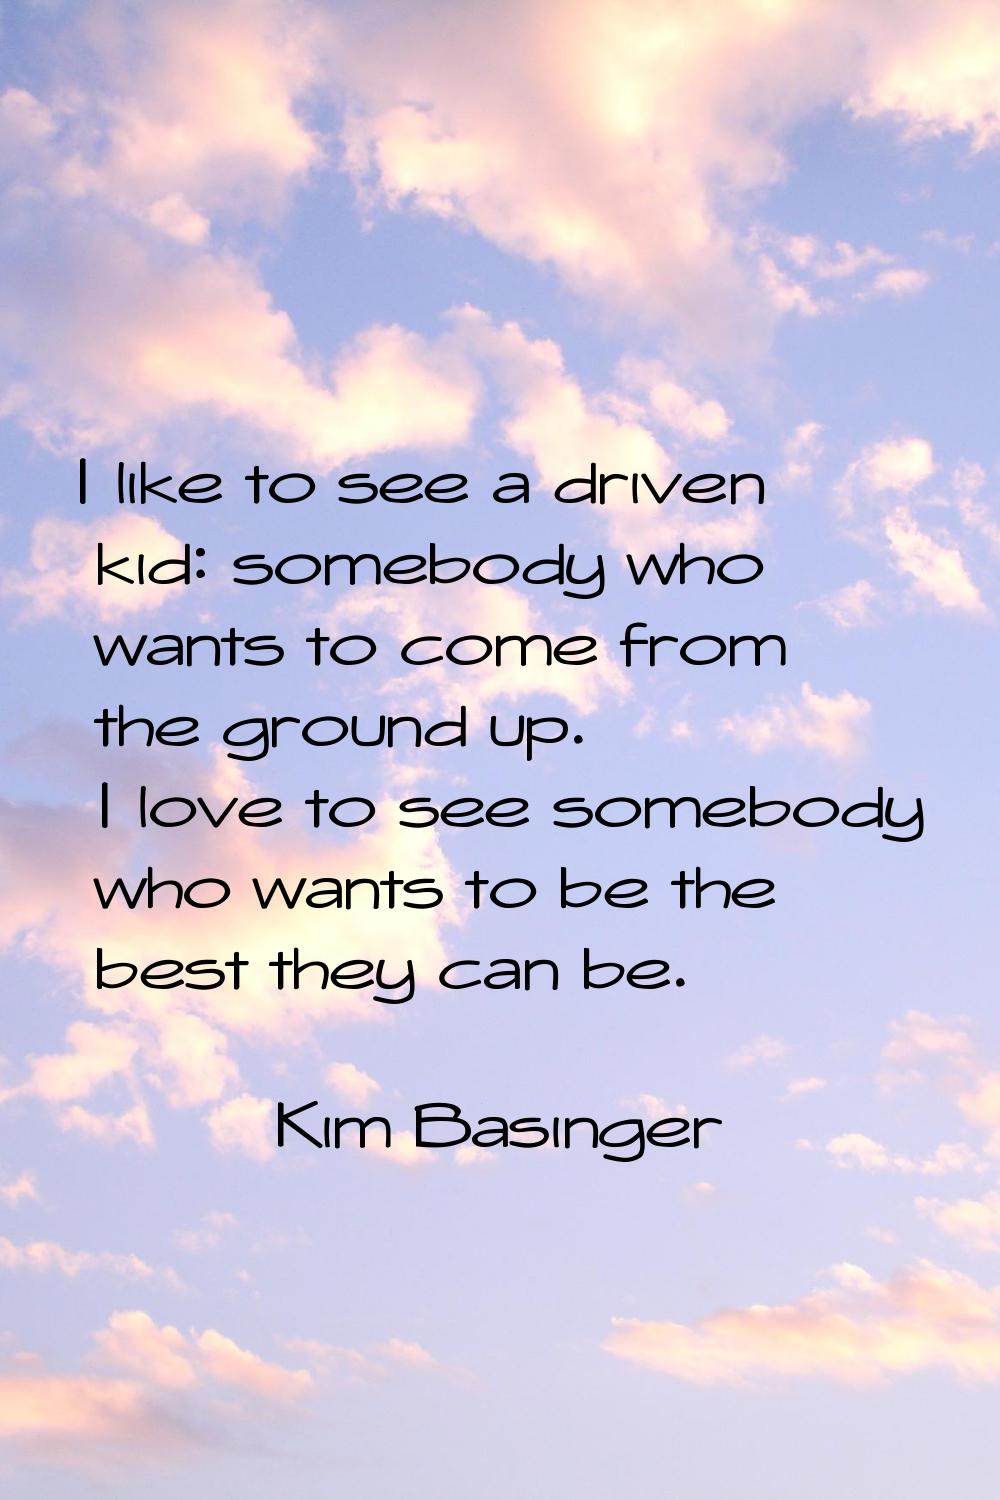 I like to see a driven kid: somebody who wants to come from the ground up. I love to see somebody w